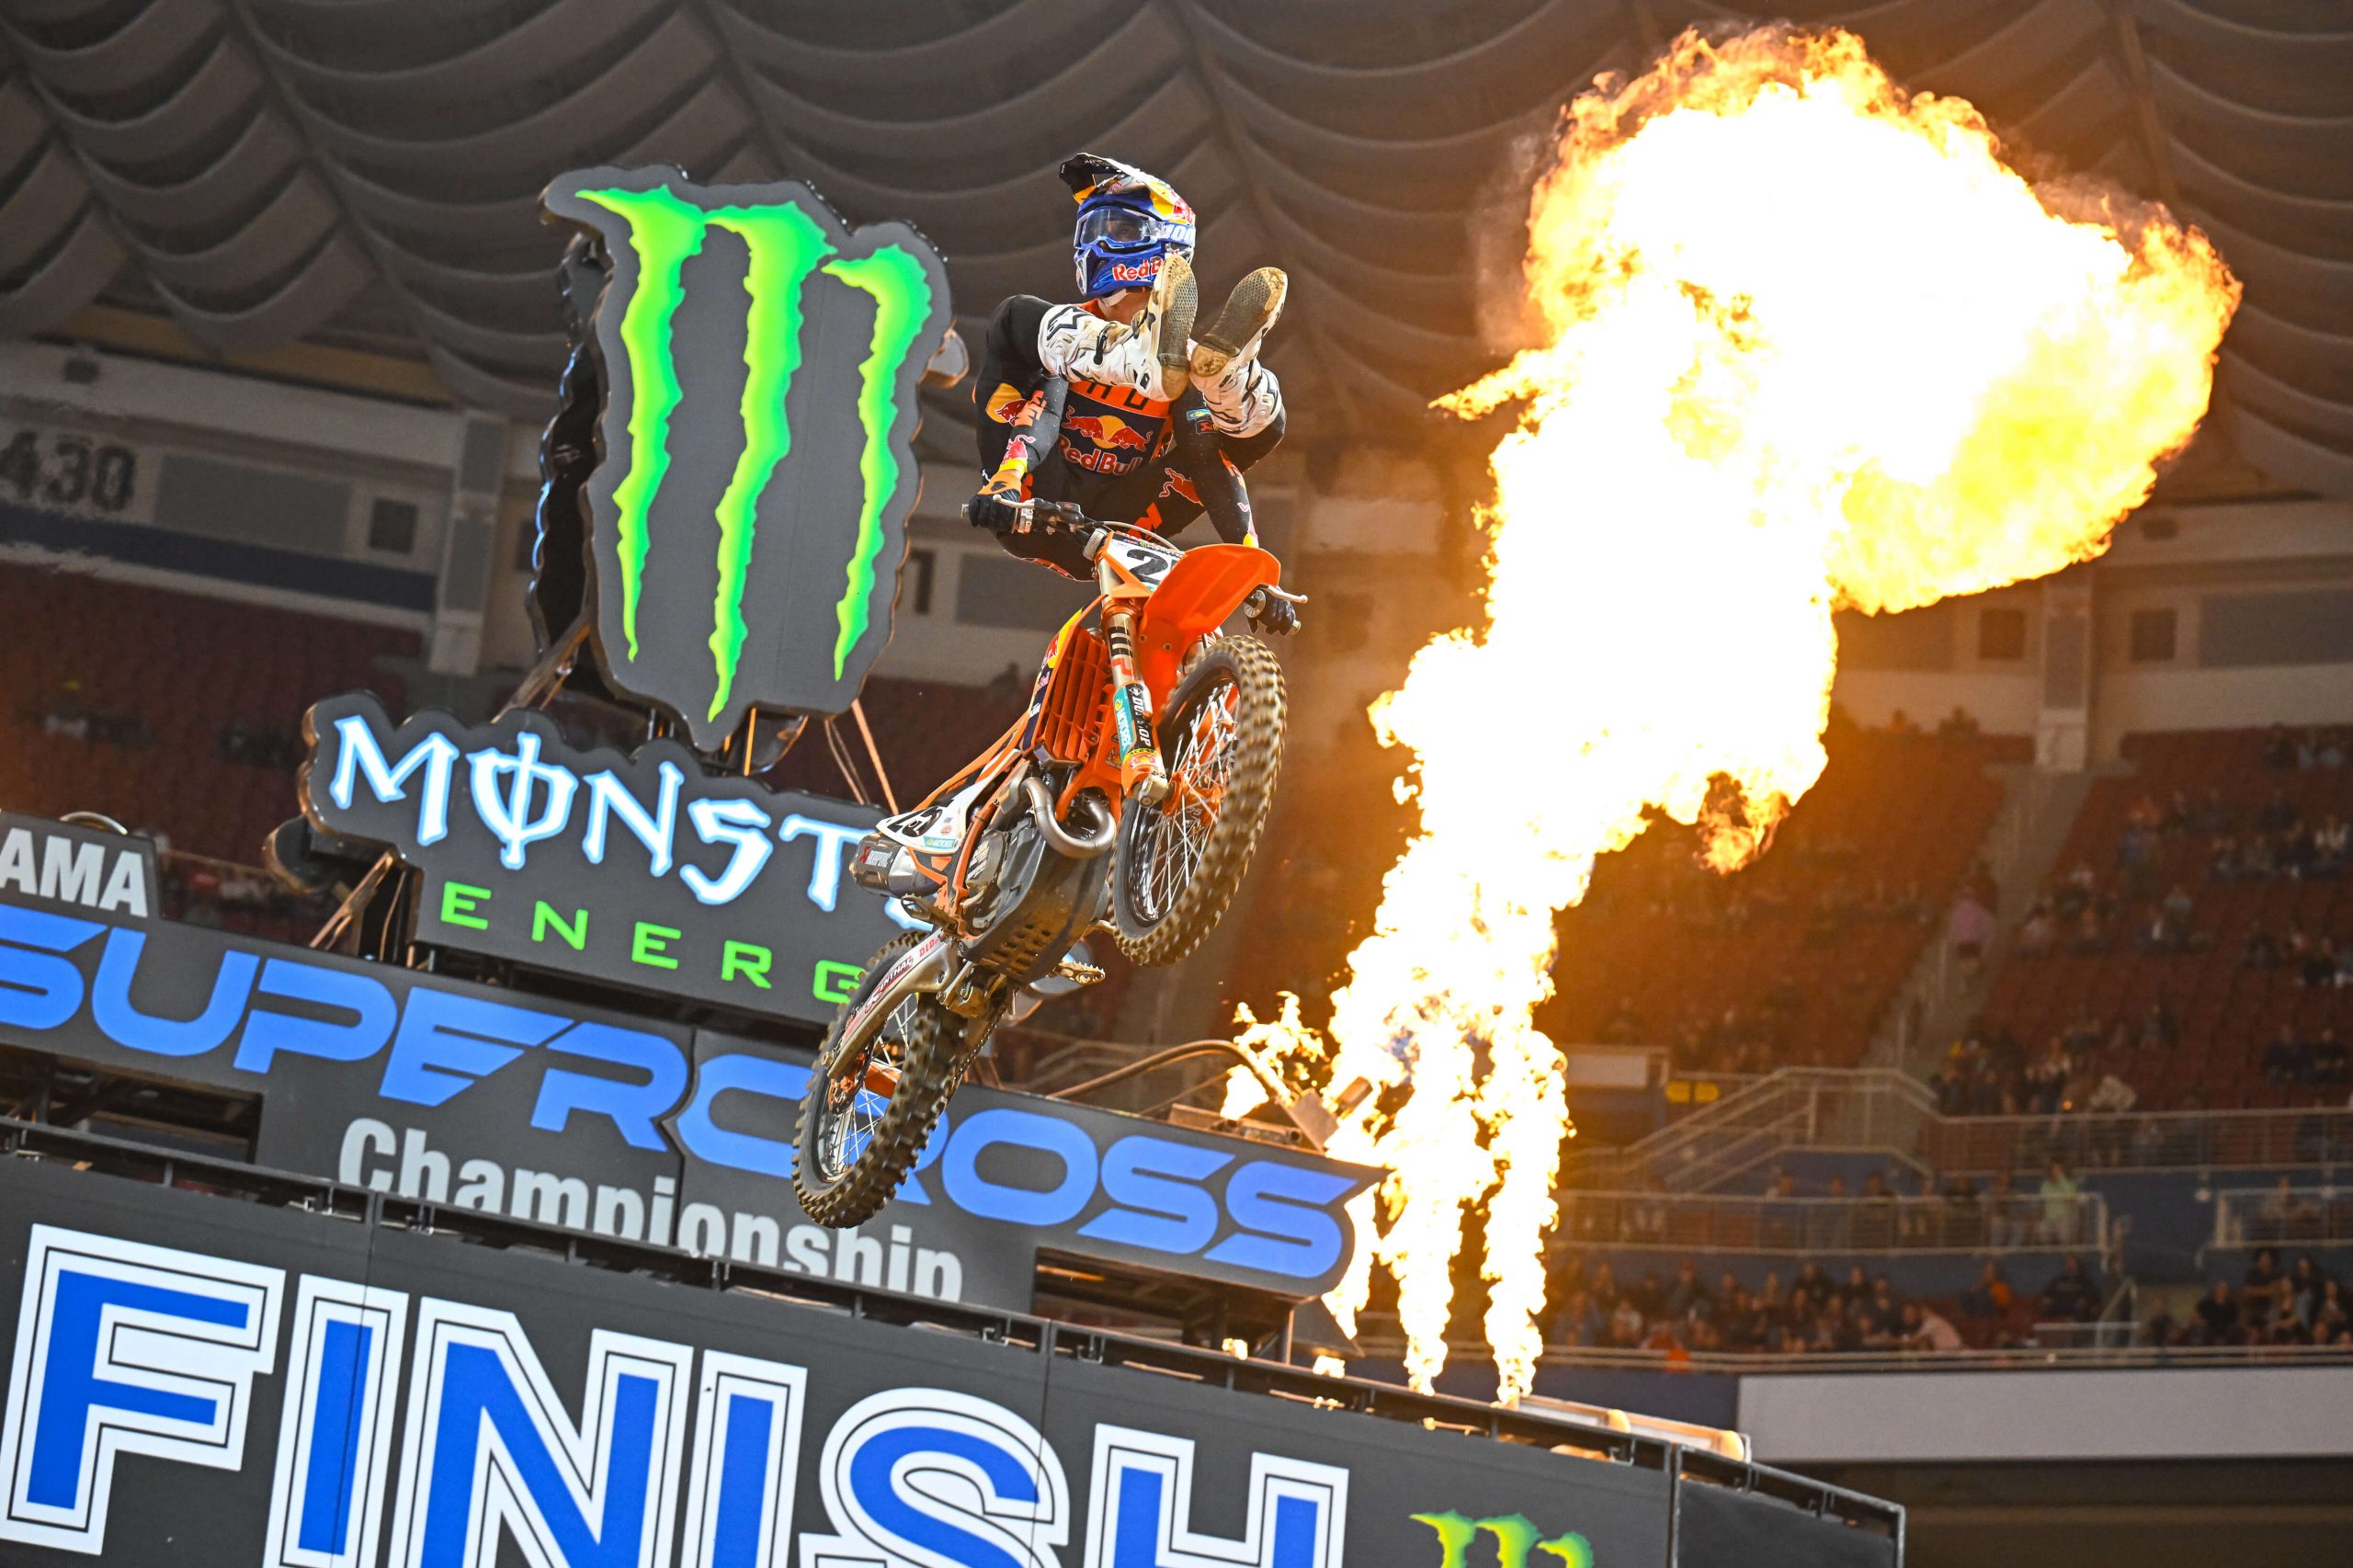 TV broadcast schedule released for AMA SX, AMA MX and SMX